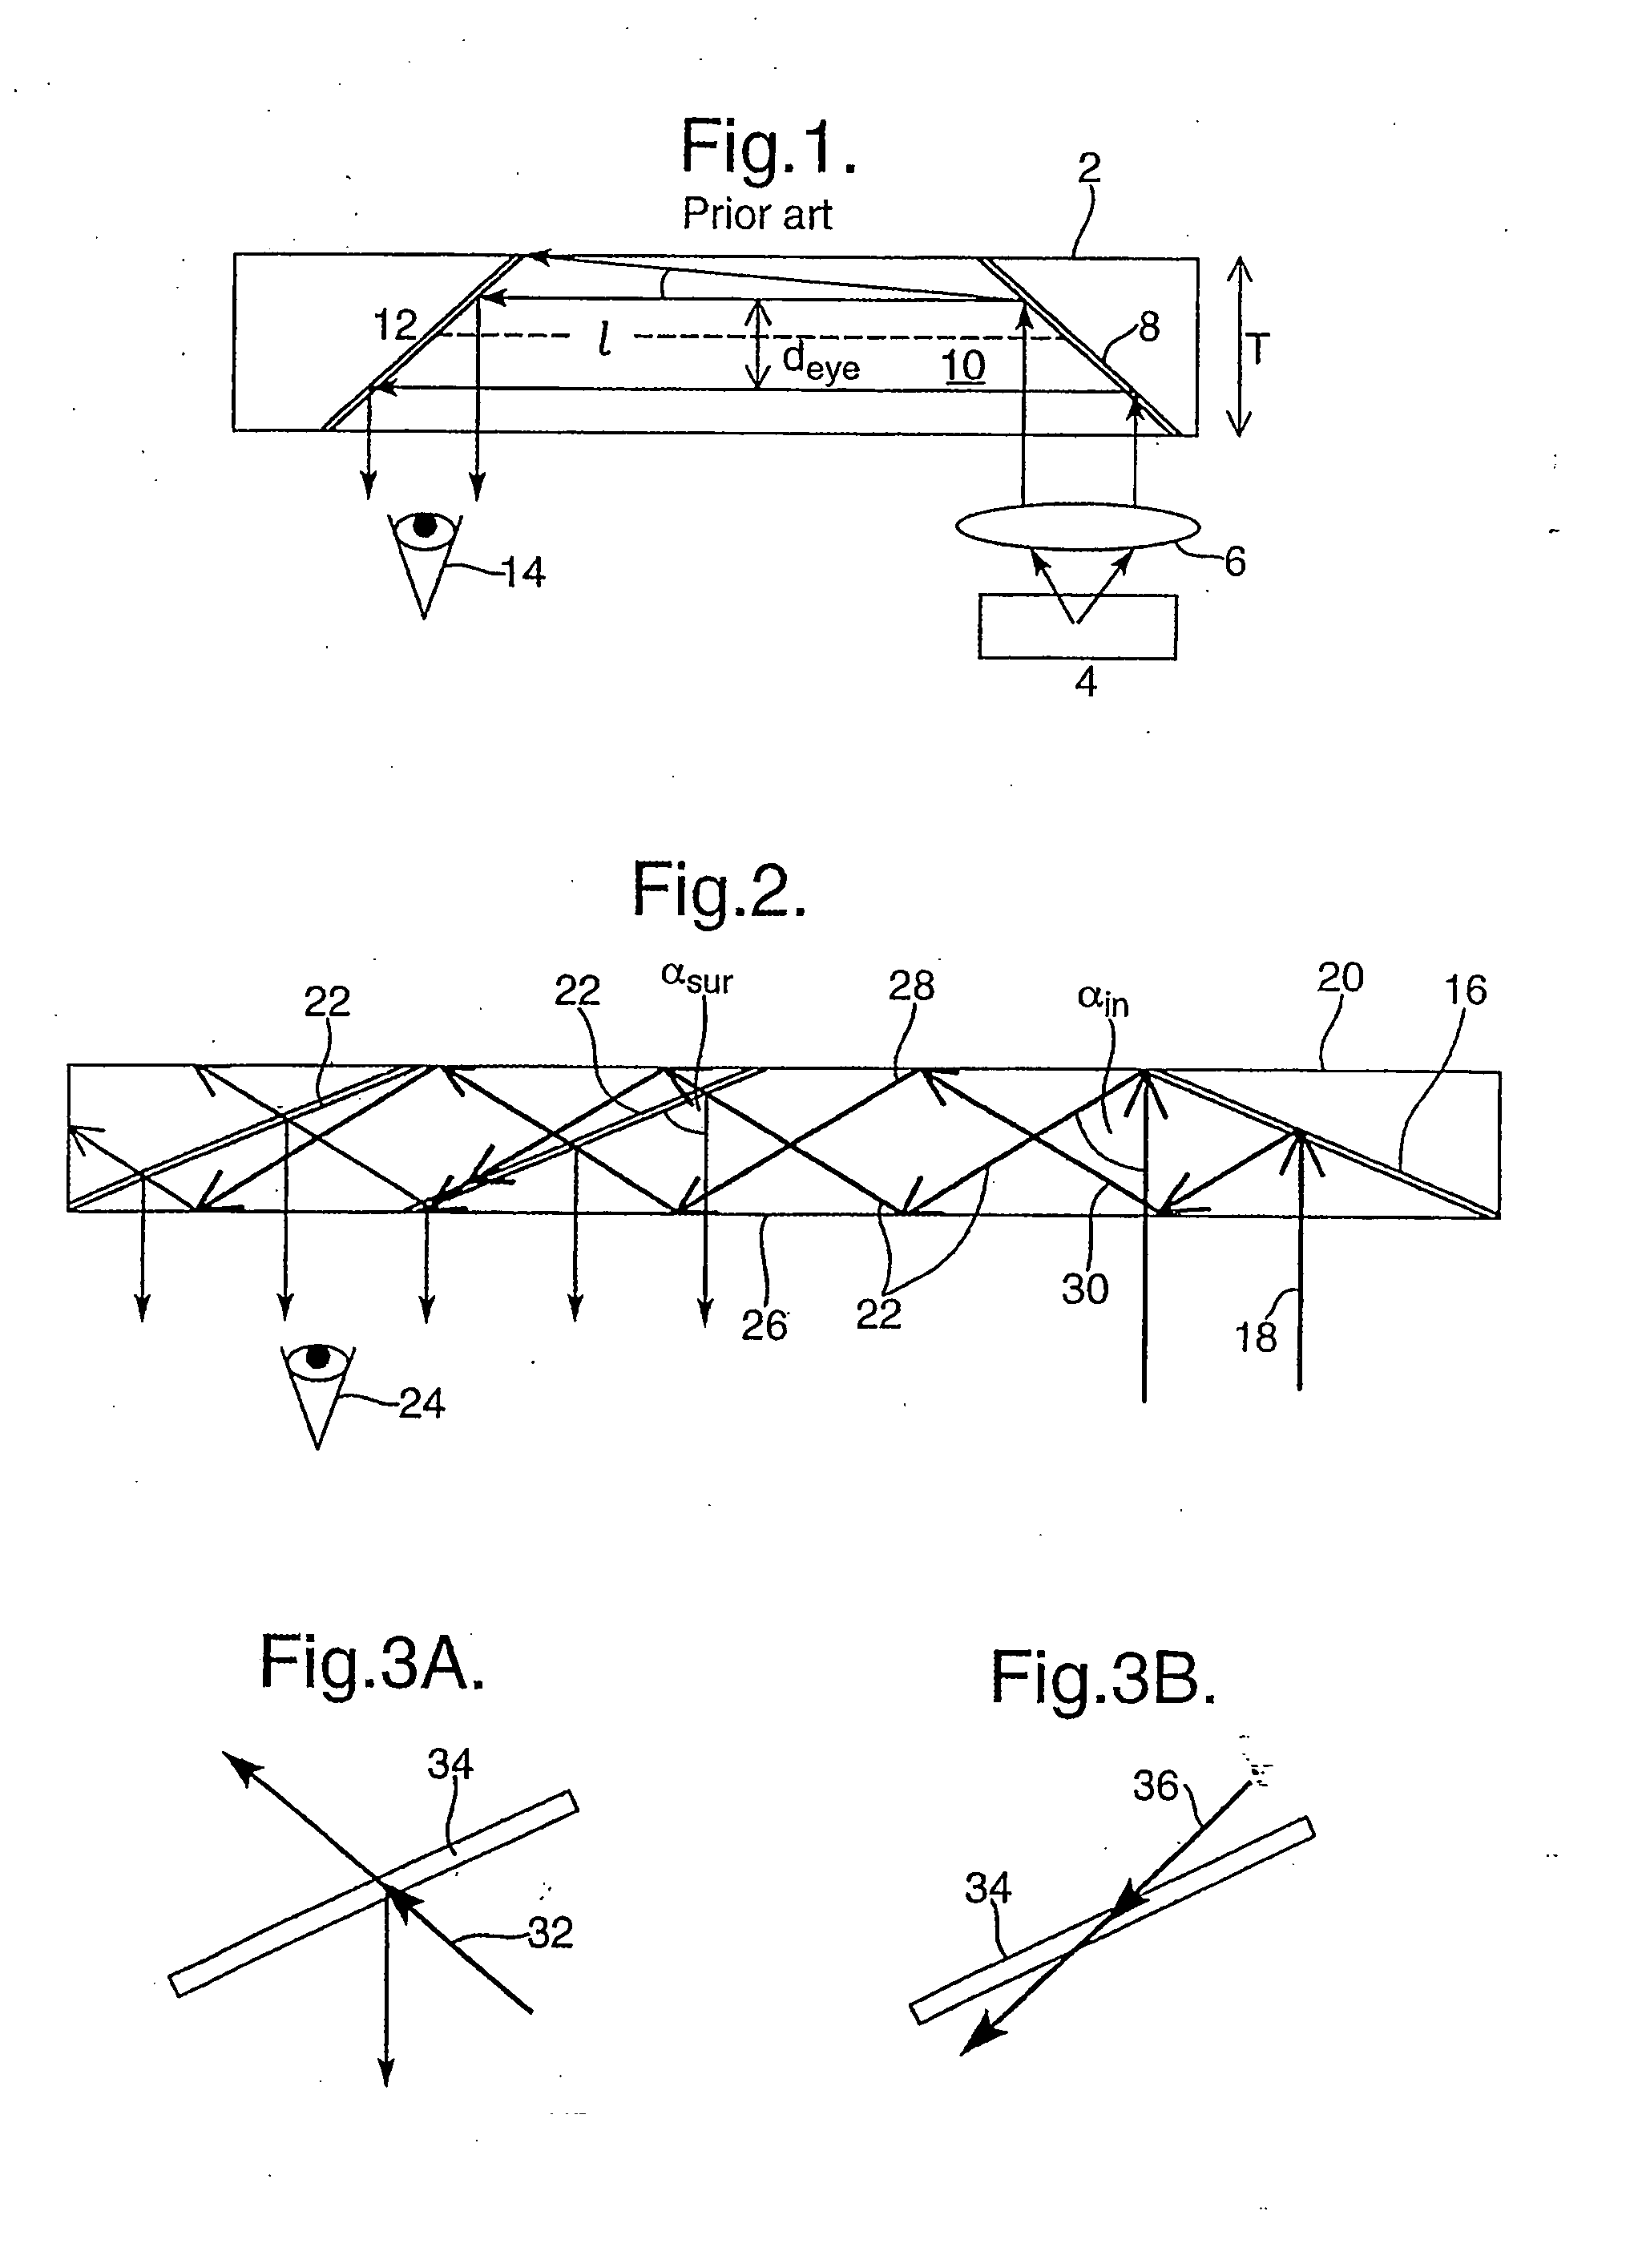 Light guide optical device